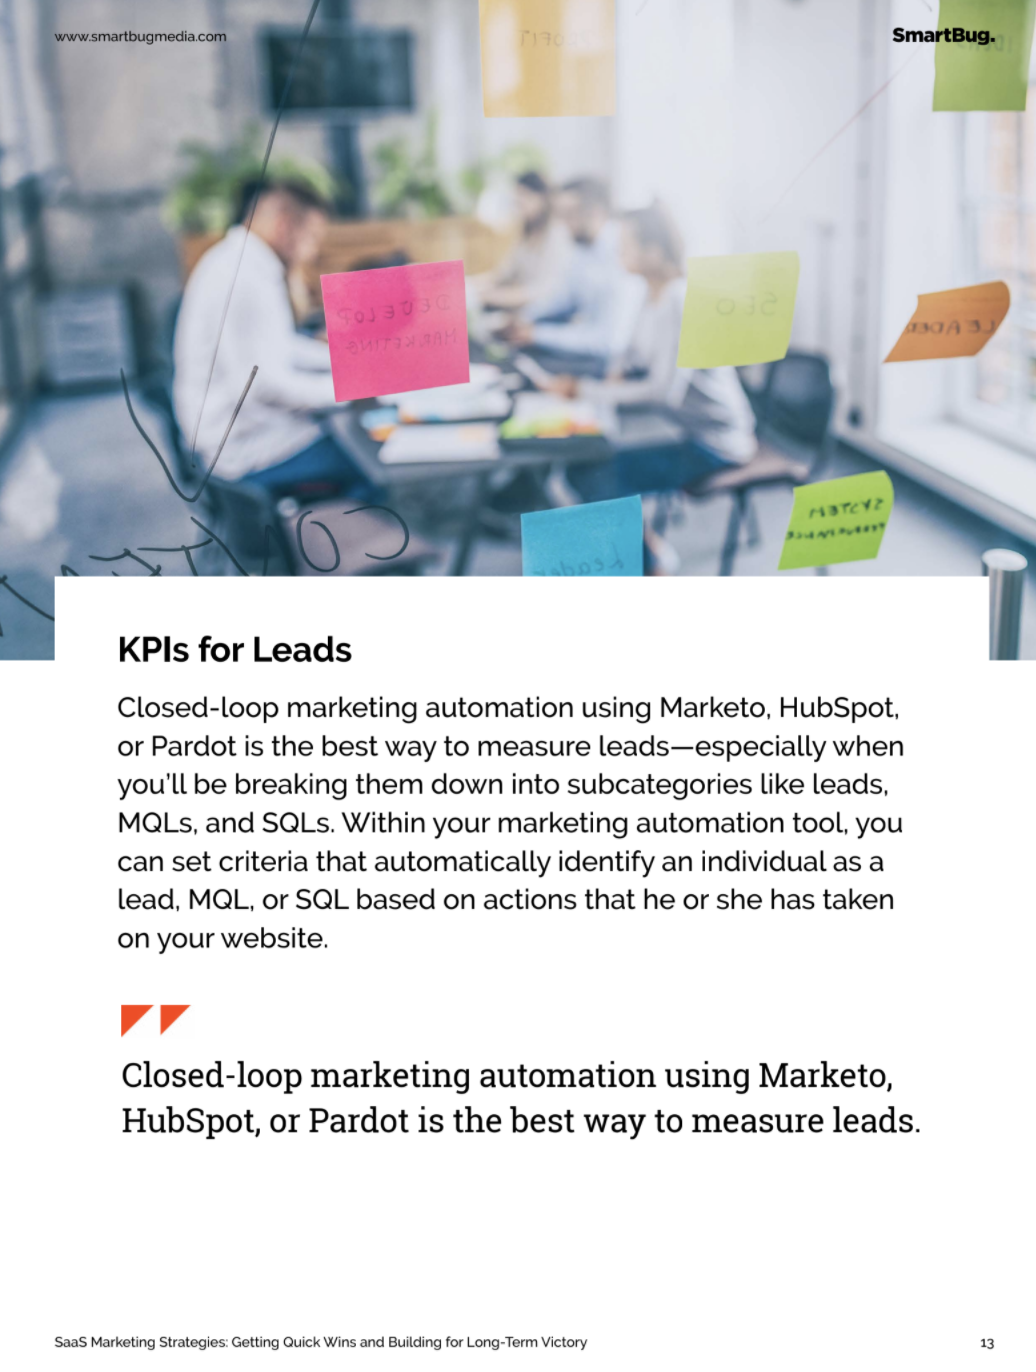 KPIs for Leads